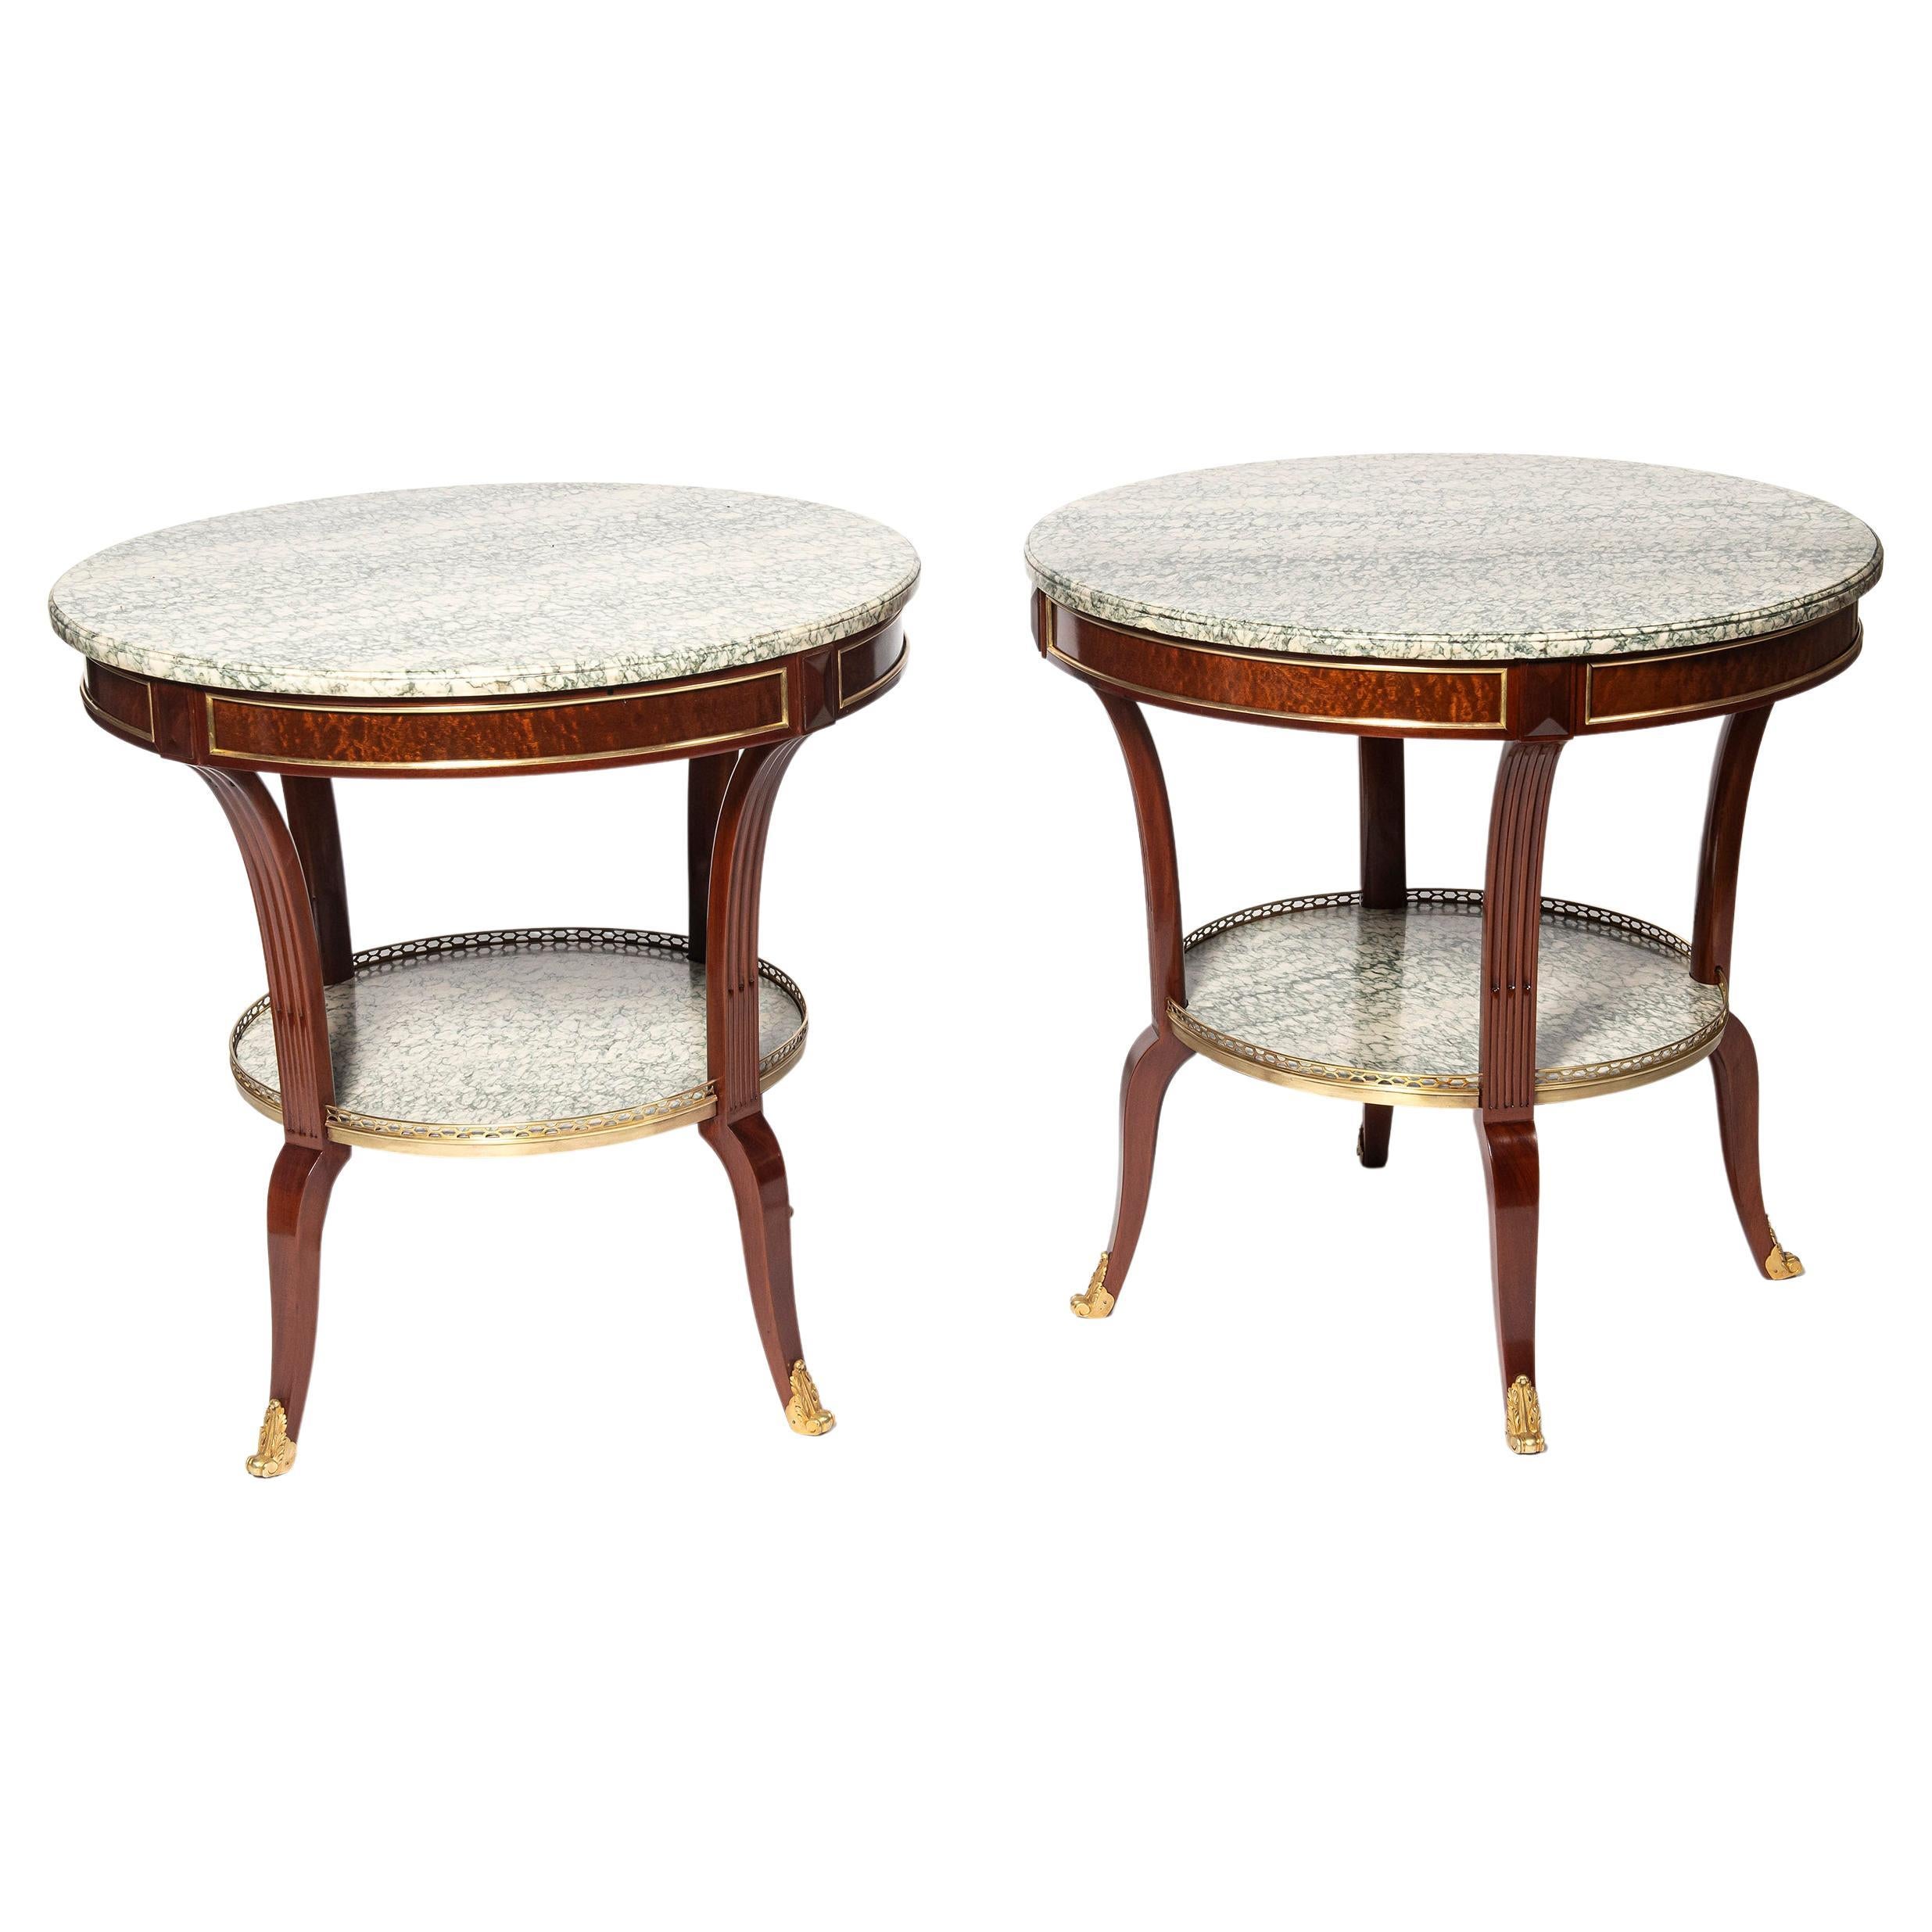 Pair of Wood, Marble and Bronze Side Tables, France, Late 19th Century